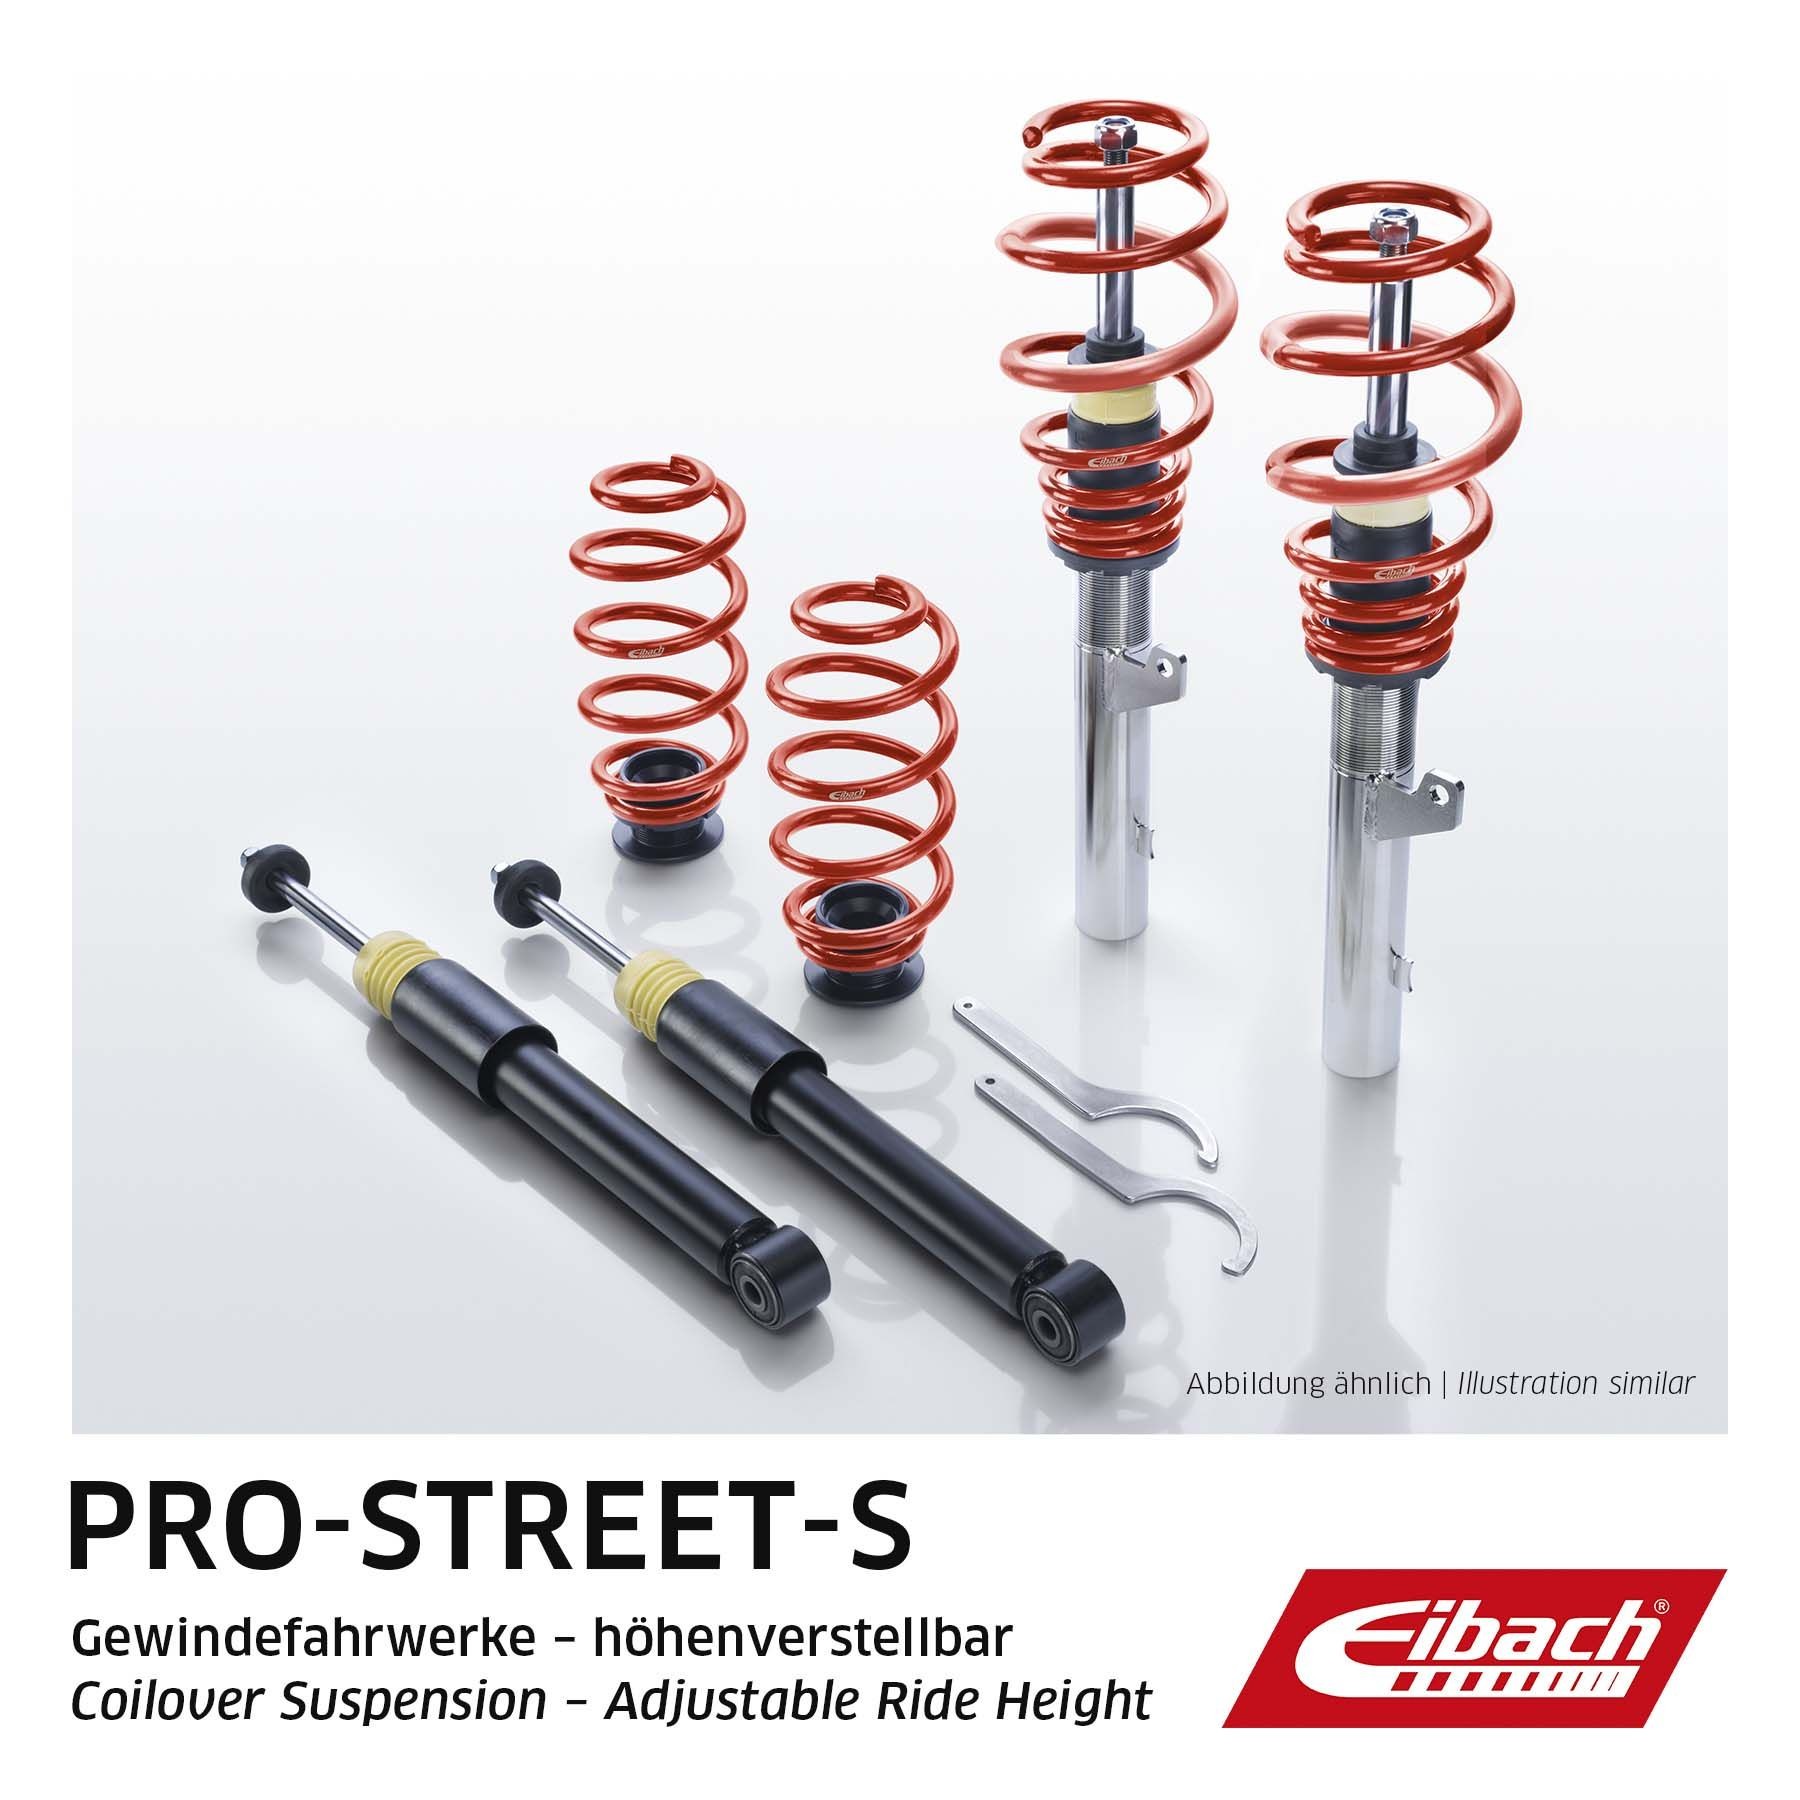 EIBACH Suspension kit, coil springs / shock absorbers VW Golf II Hatchback (19E, 1G1) new PSS65-85-003-01-22